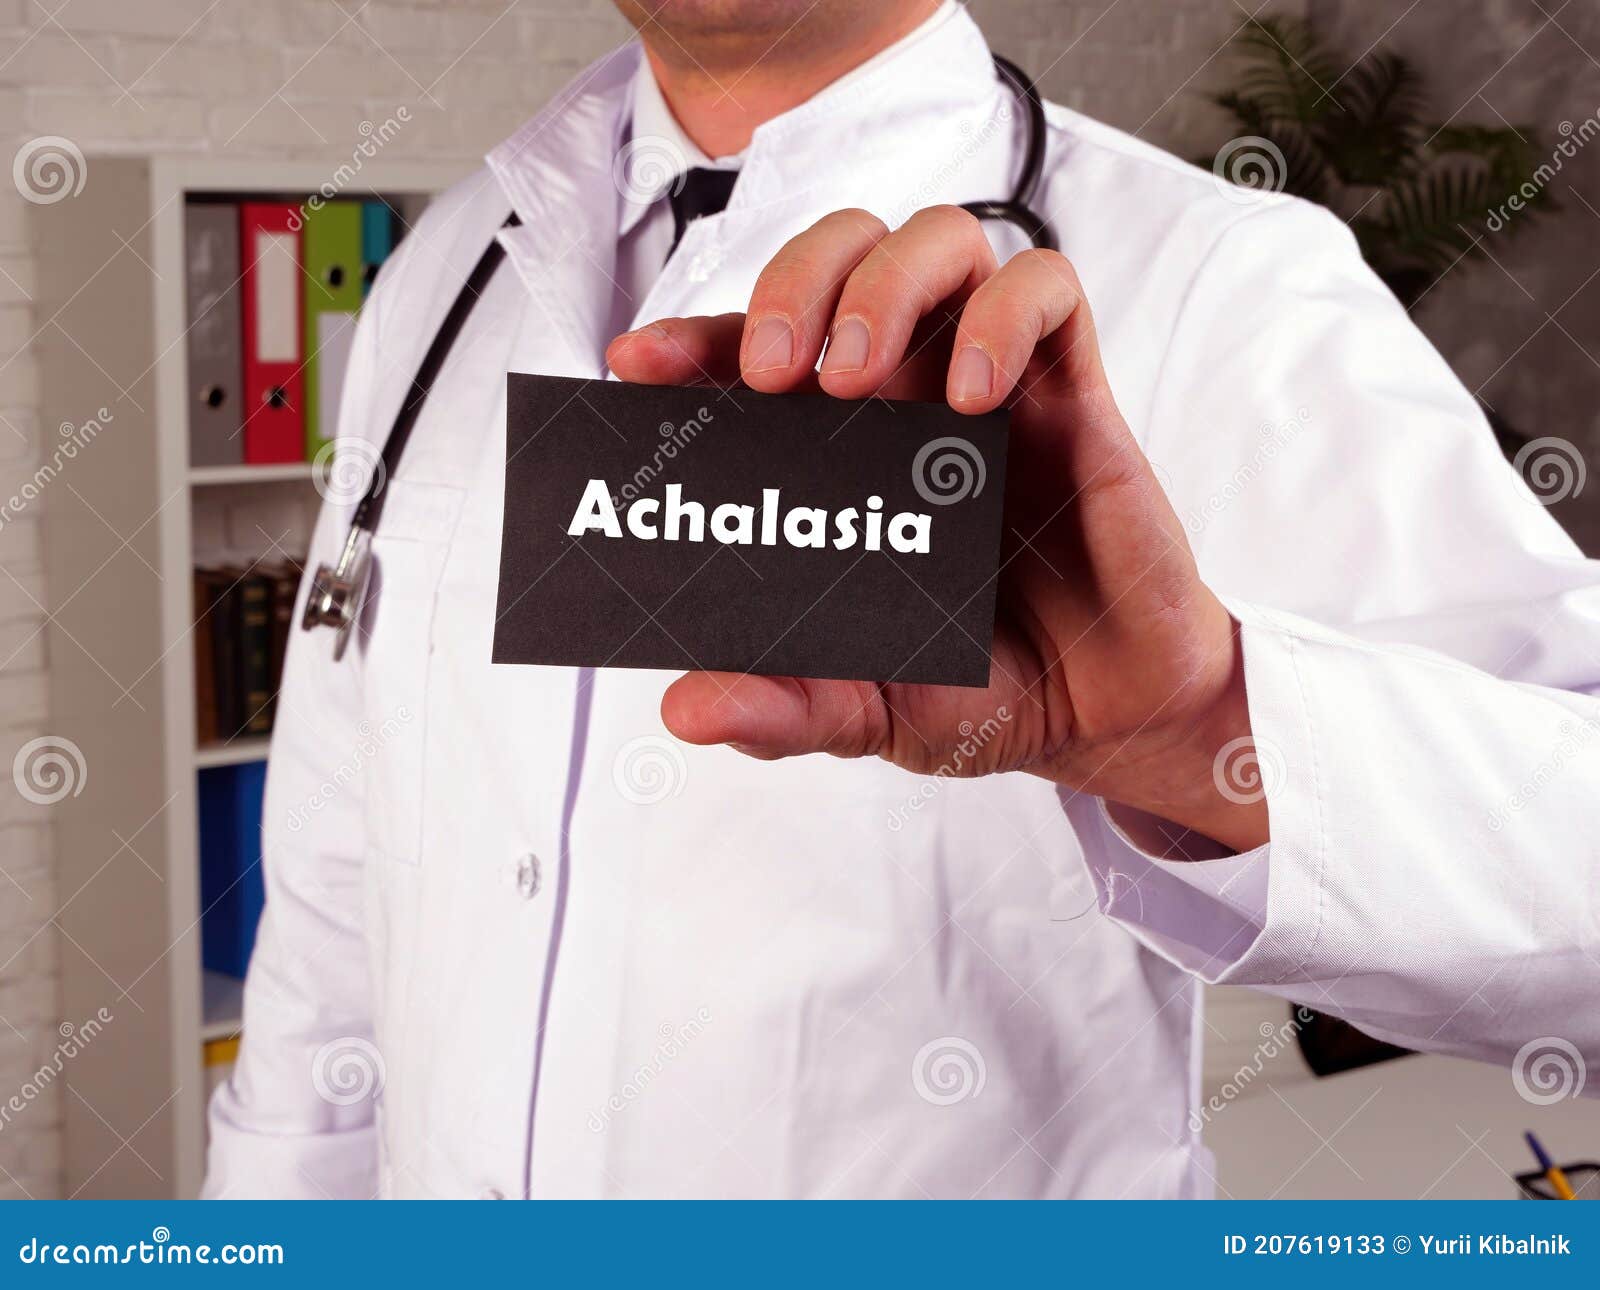 health care concept meaning achalasia with phrase on the piece of paper